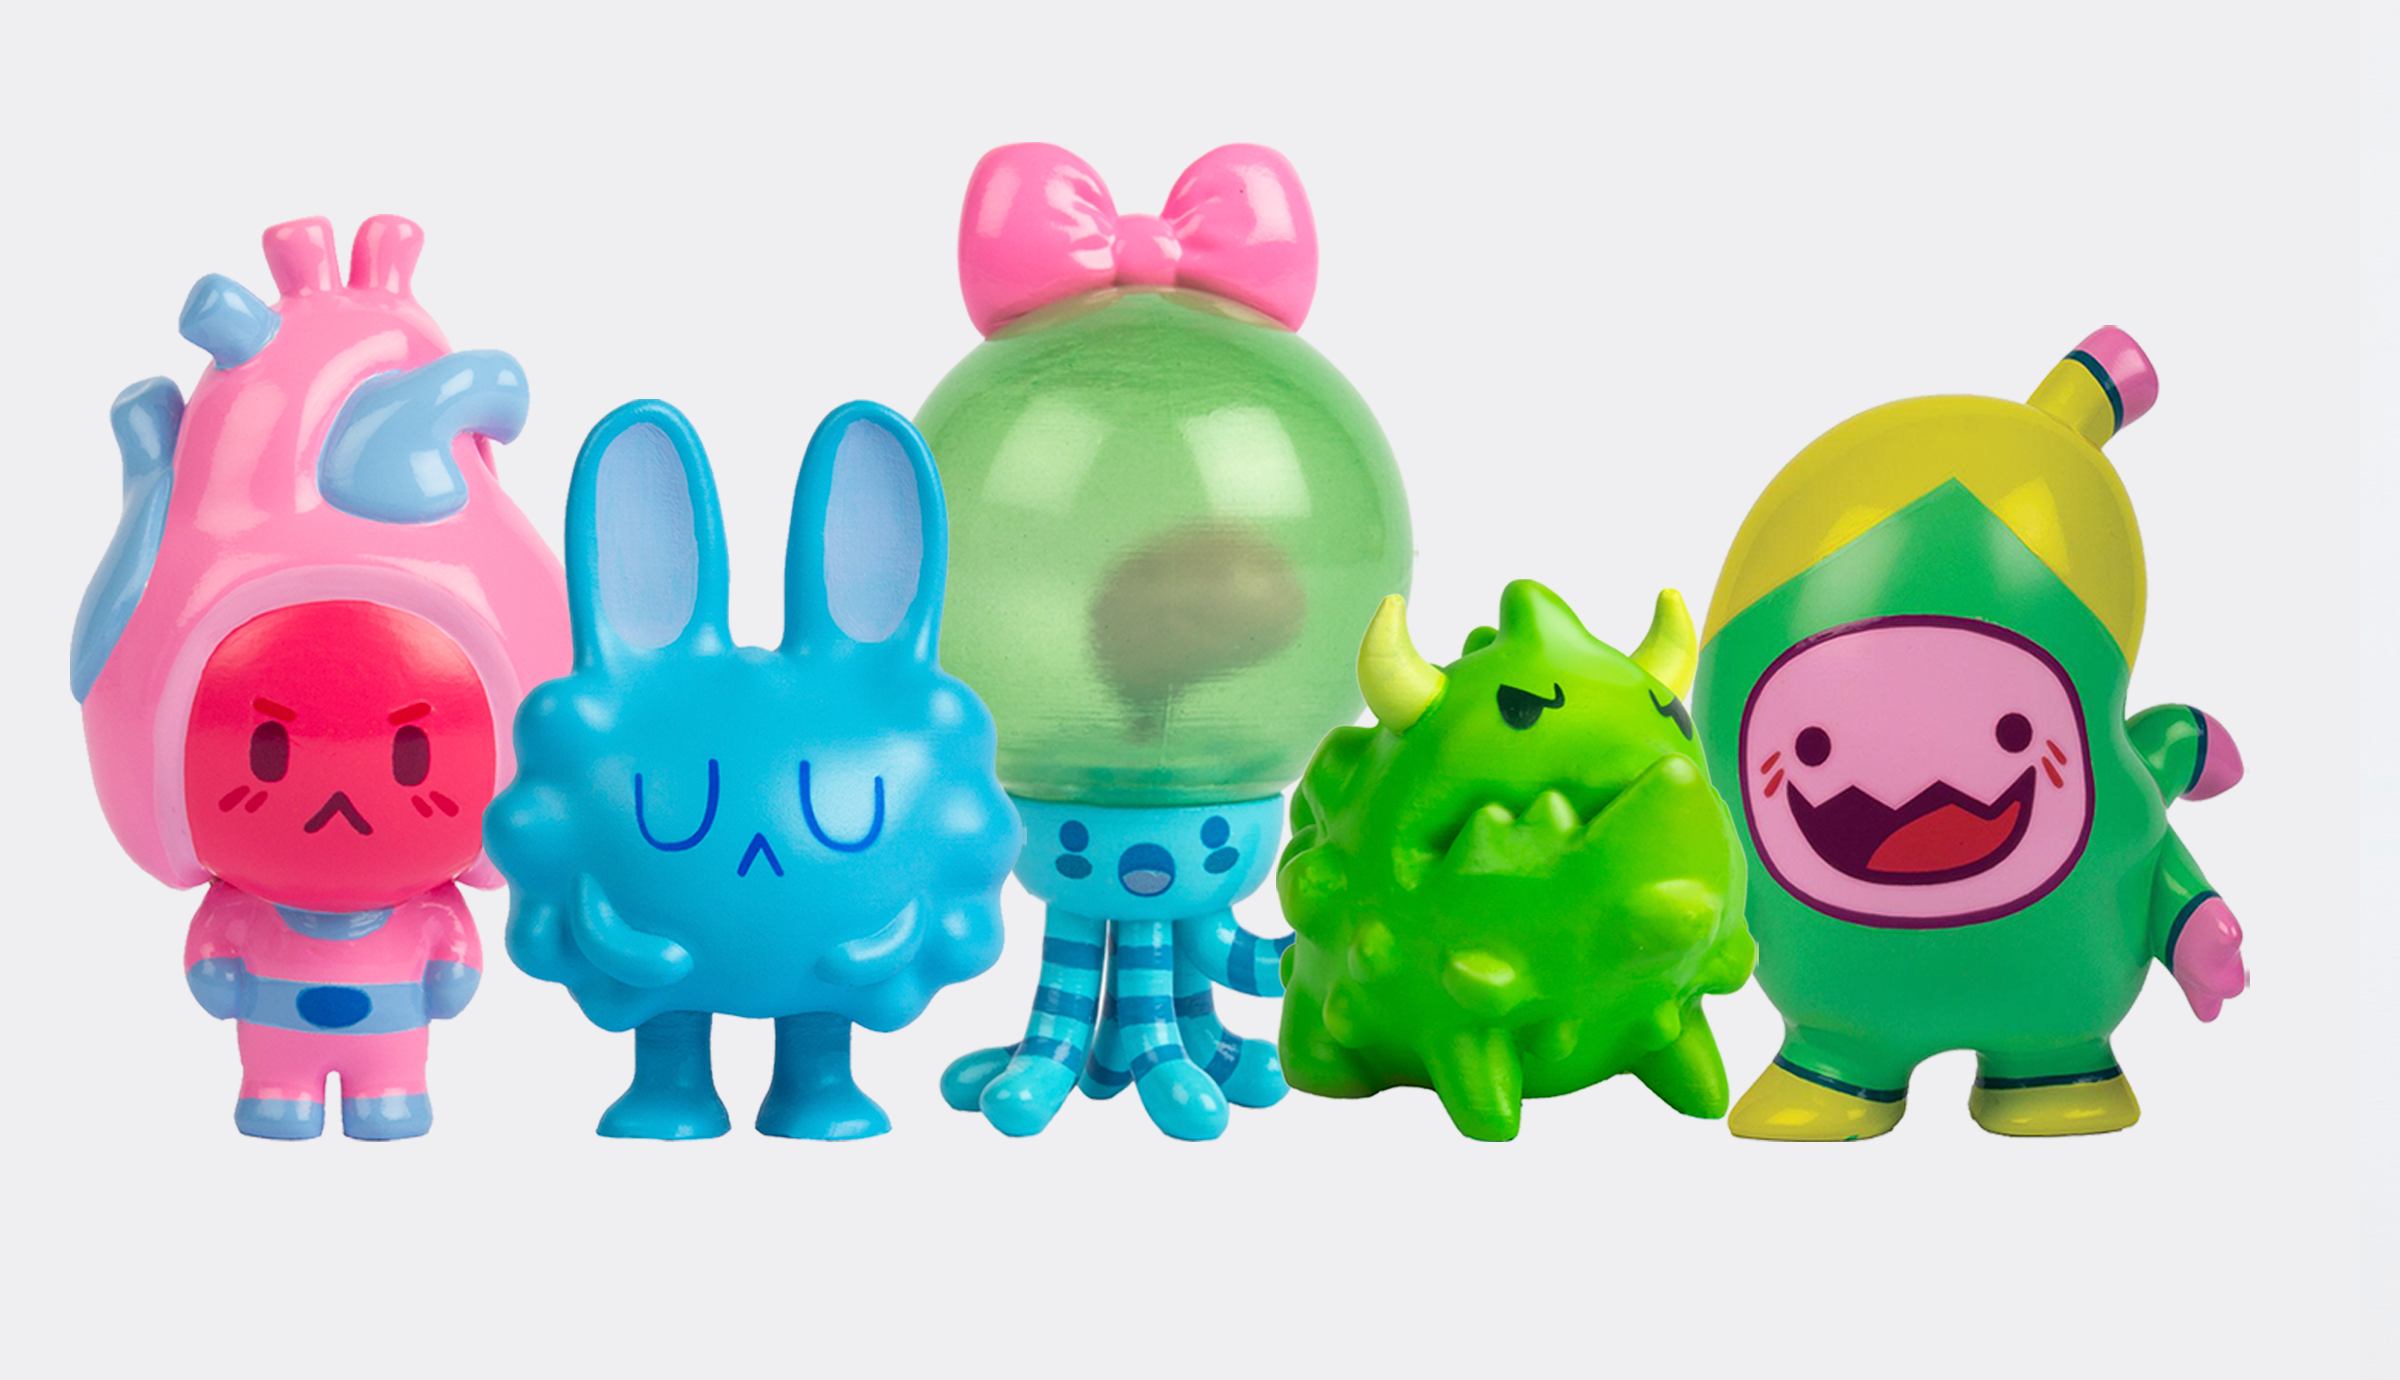 Lineup of fiver colorful Organauts figures